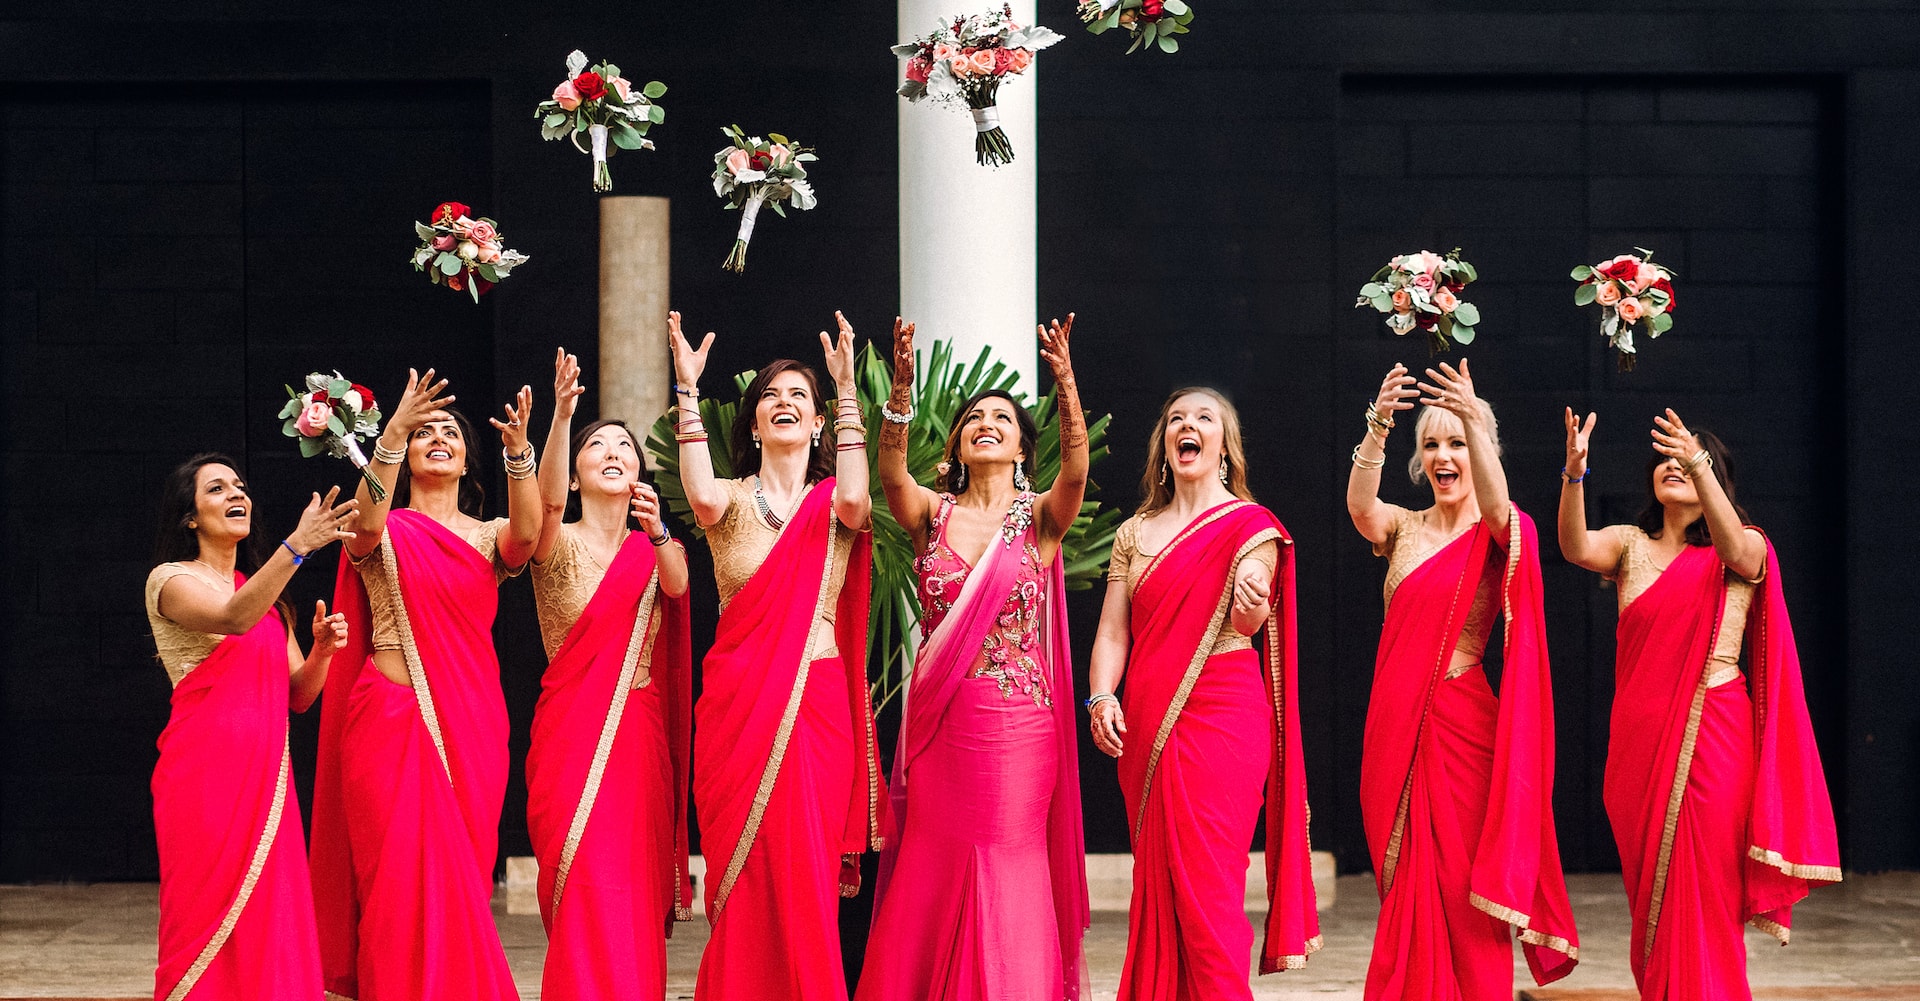 Indian bride and bridesmaids through their bouquets up before a wedding ceremony